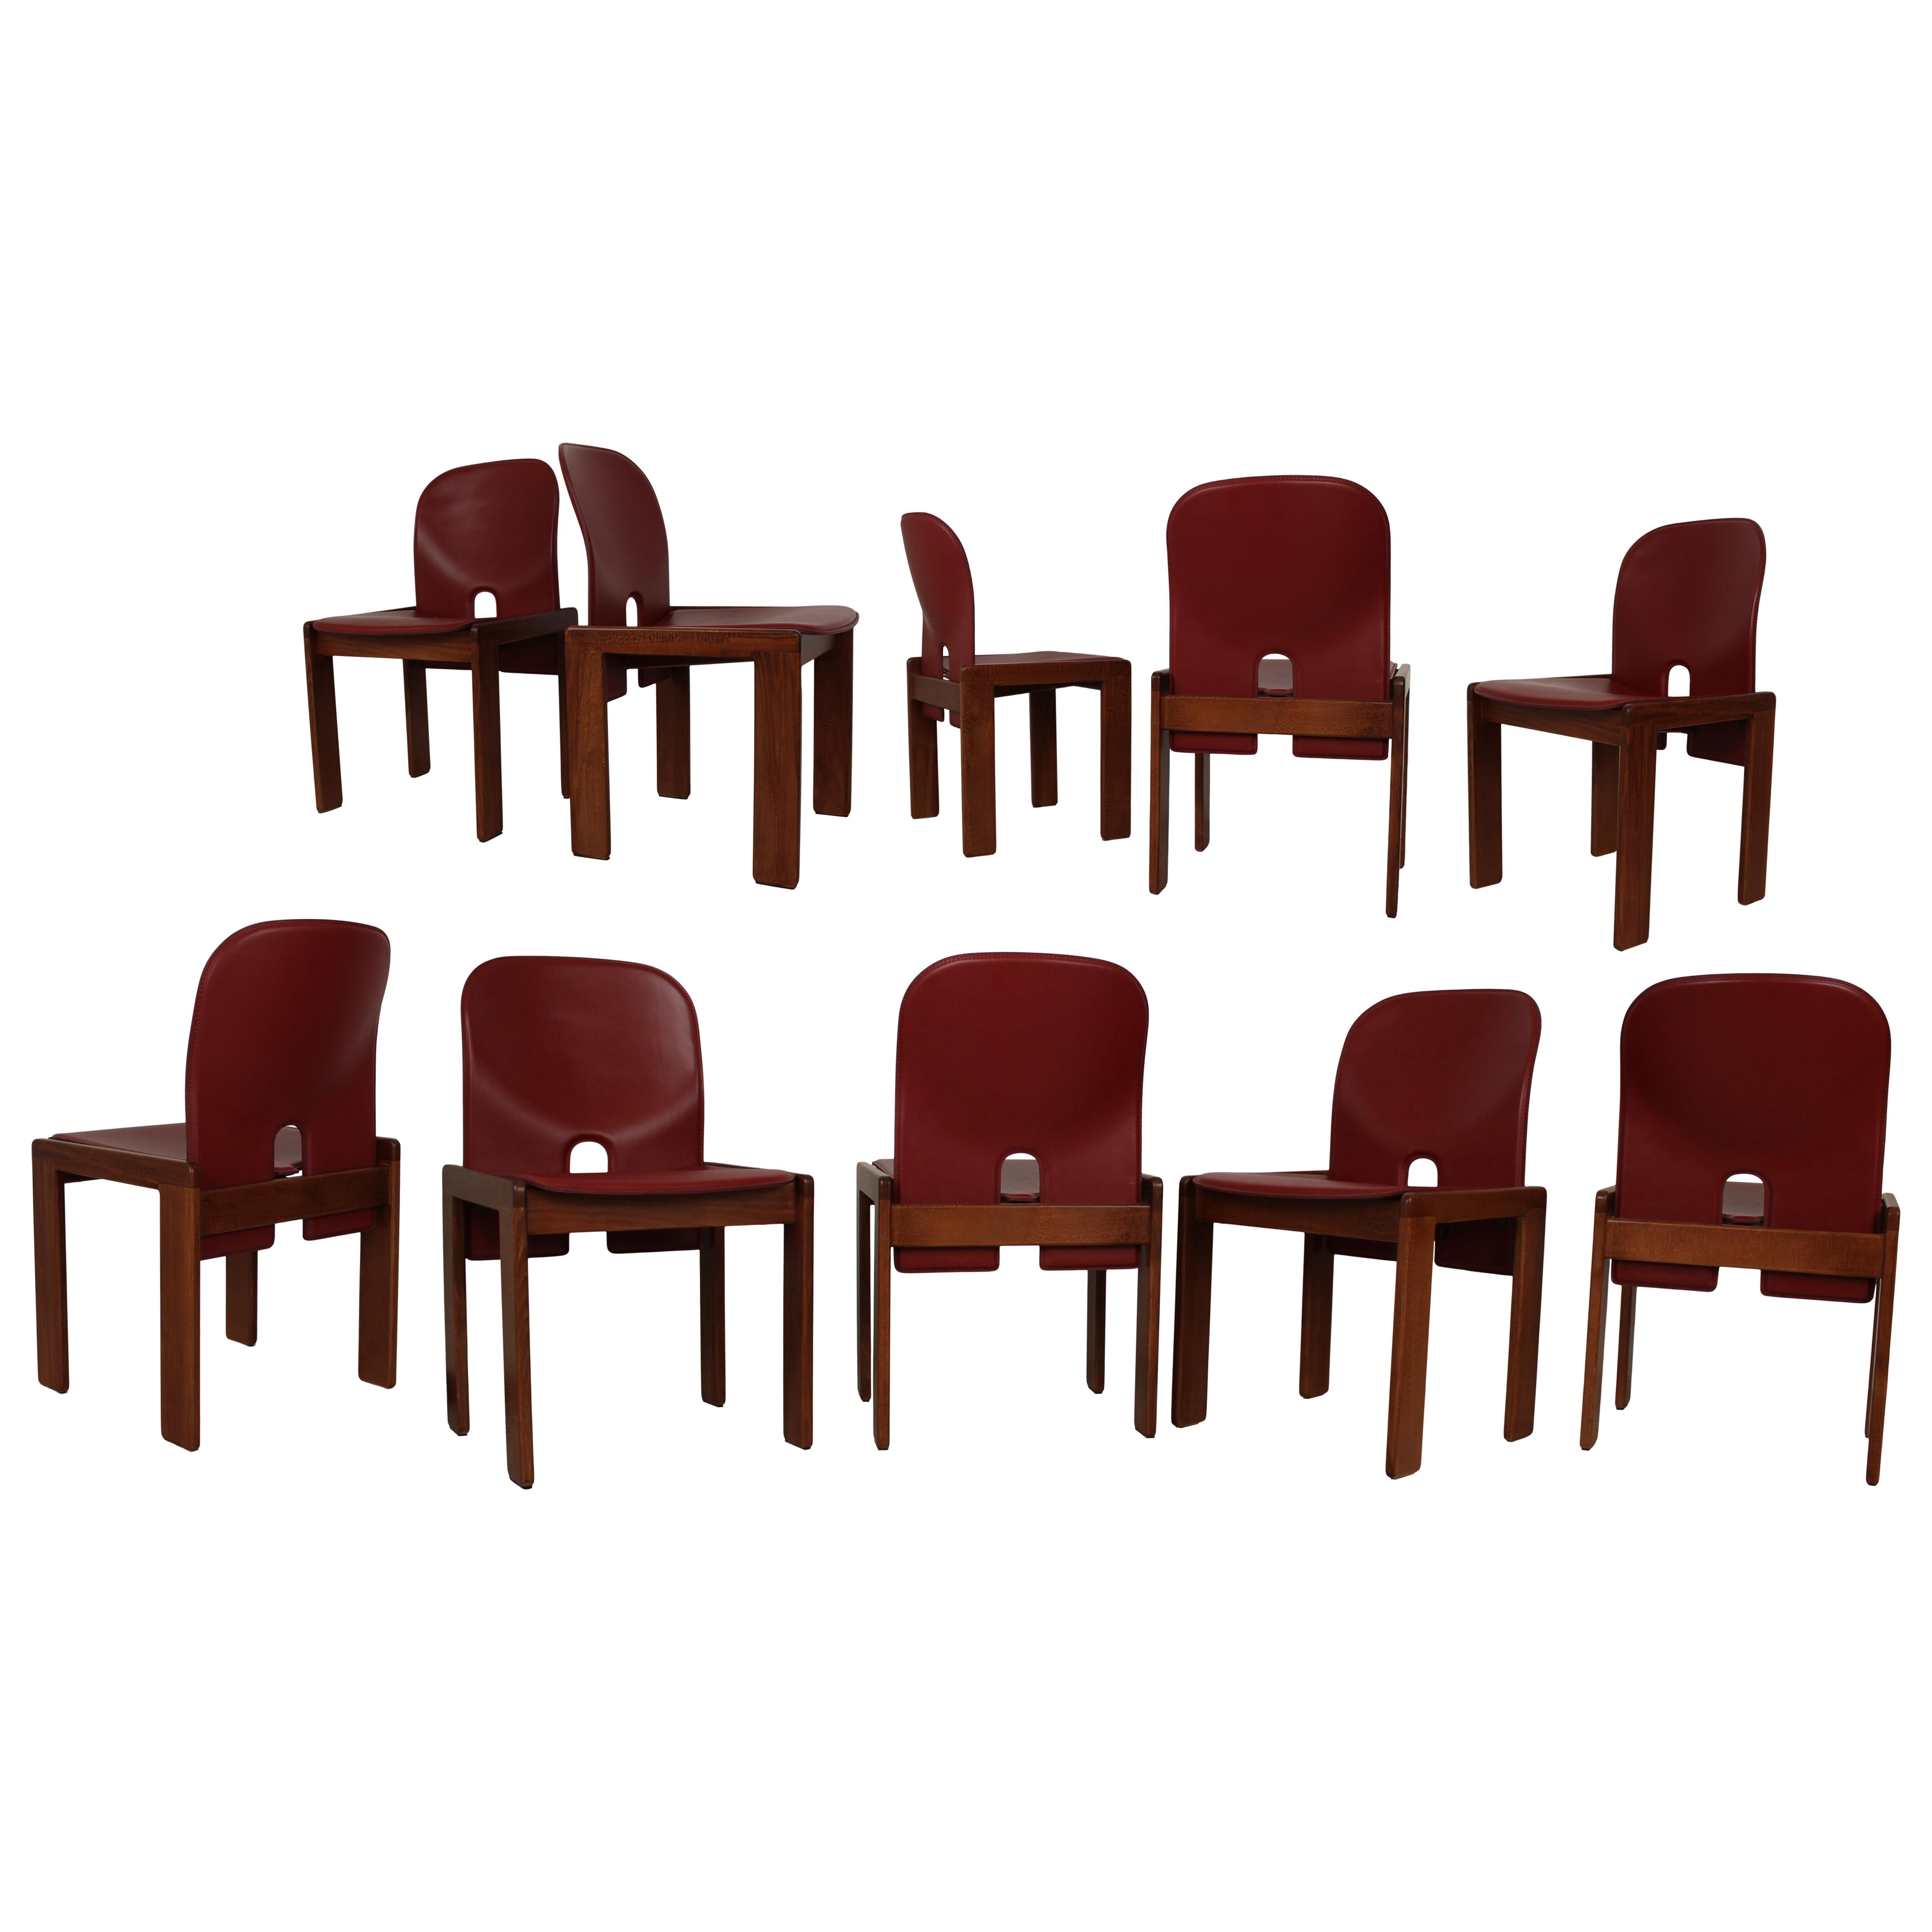 Set of ten Model 121 dining chairs, designed by Afra and Tobia Scarpa and produced by the Italian manufacturer Cassina in 1967.
They feature English red leather upholstery and a walnut structure.

Fully restored in Italy.

Afra and Tobia Scarpa